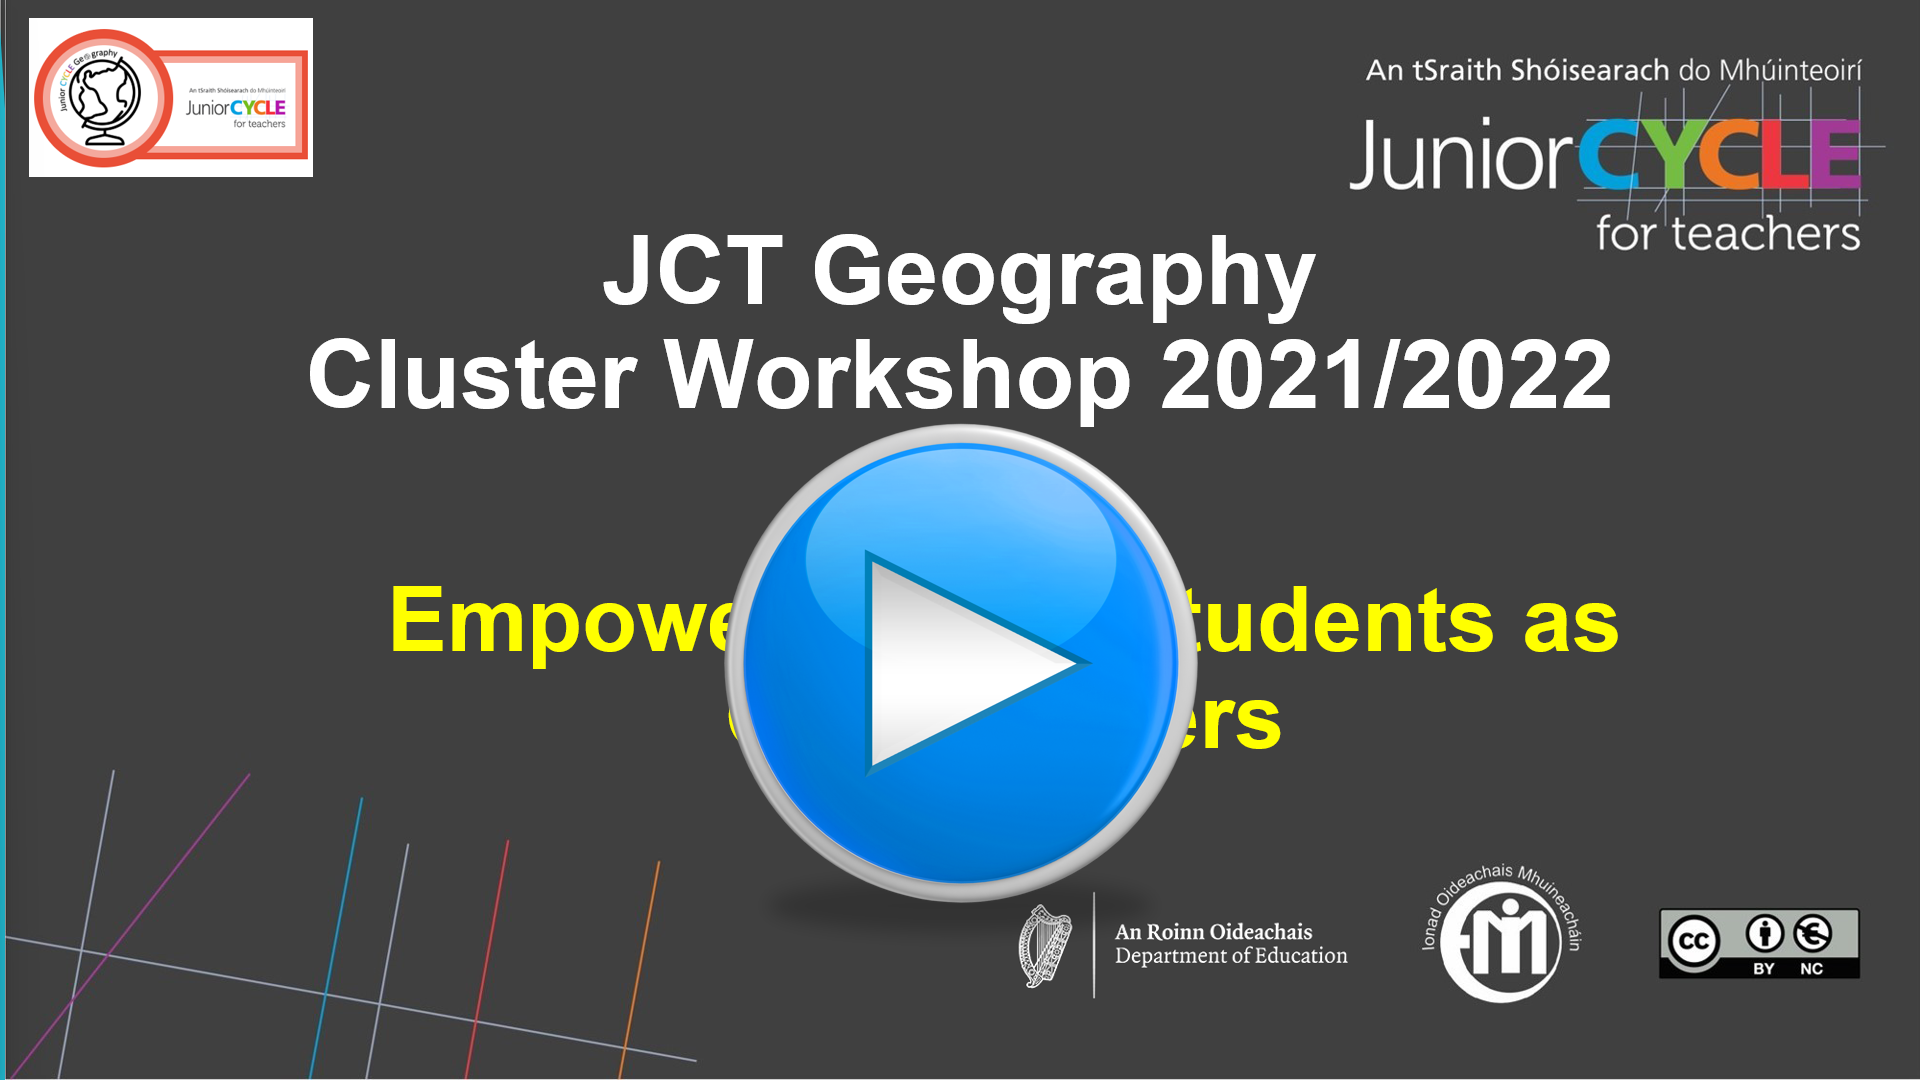 Presentation for Empowering our students as Geographers